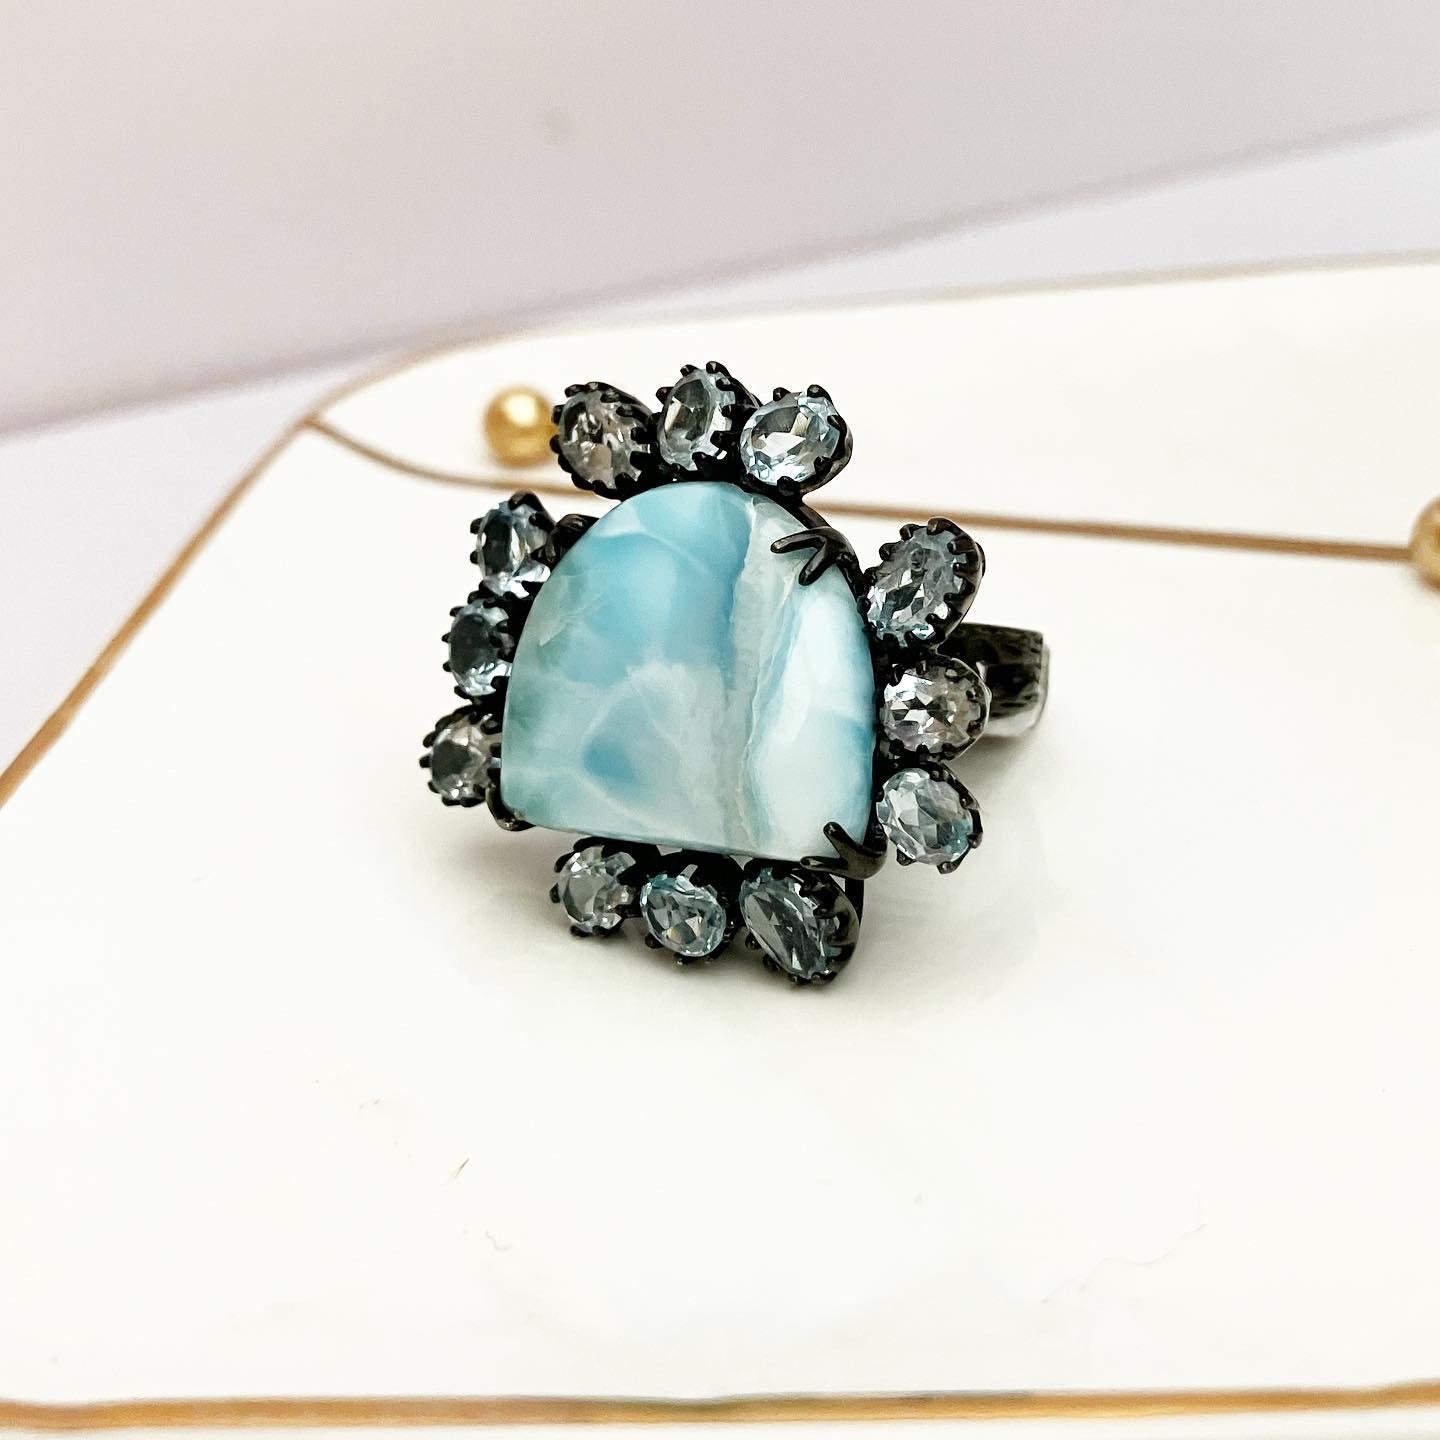 Blackened silver ring with blue agate framed with topaz.